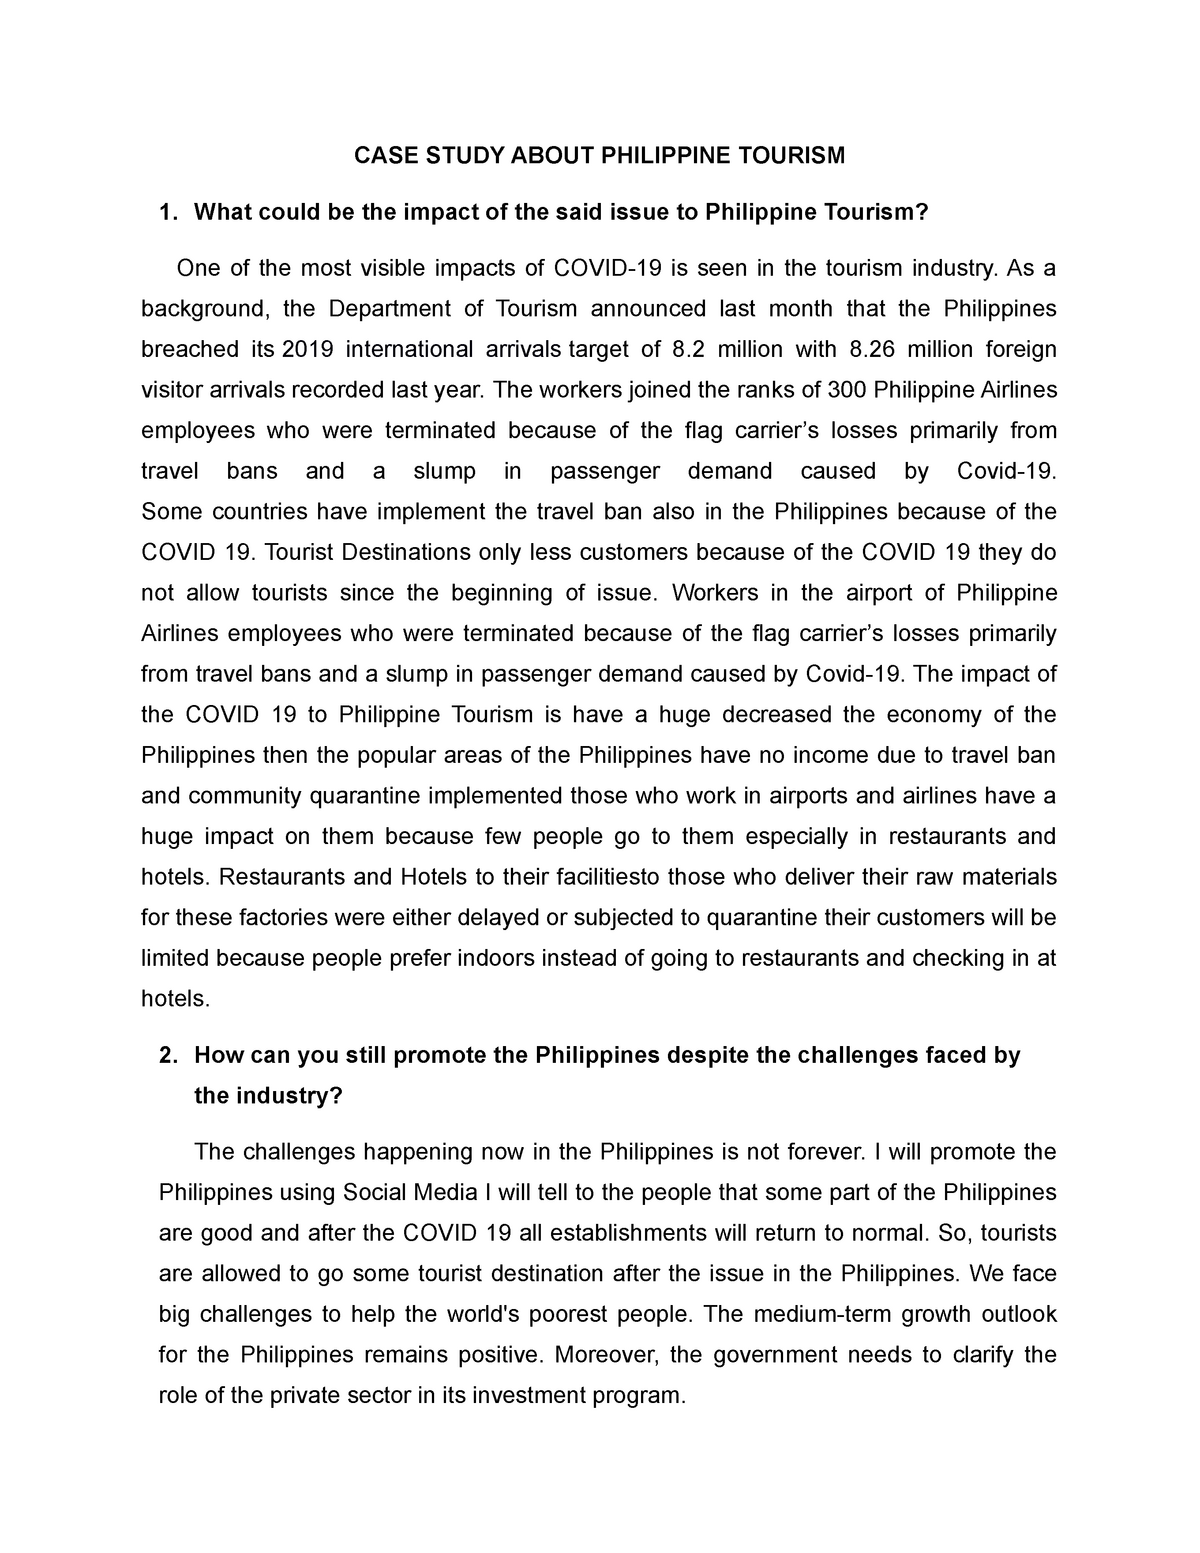 case study about tourism in the philippines